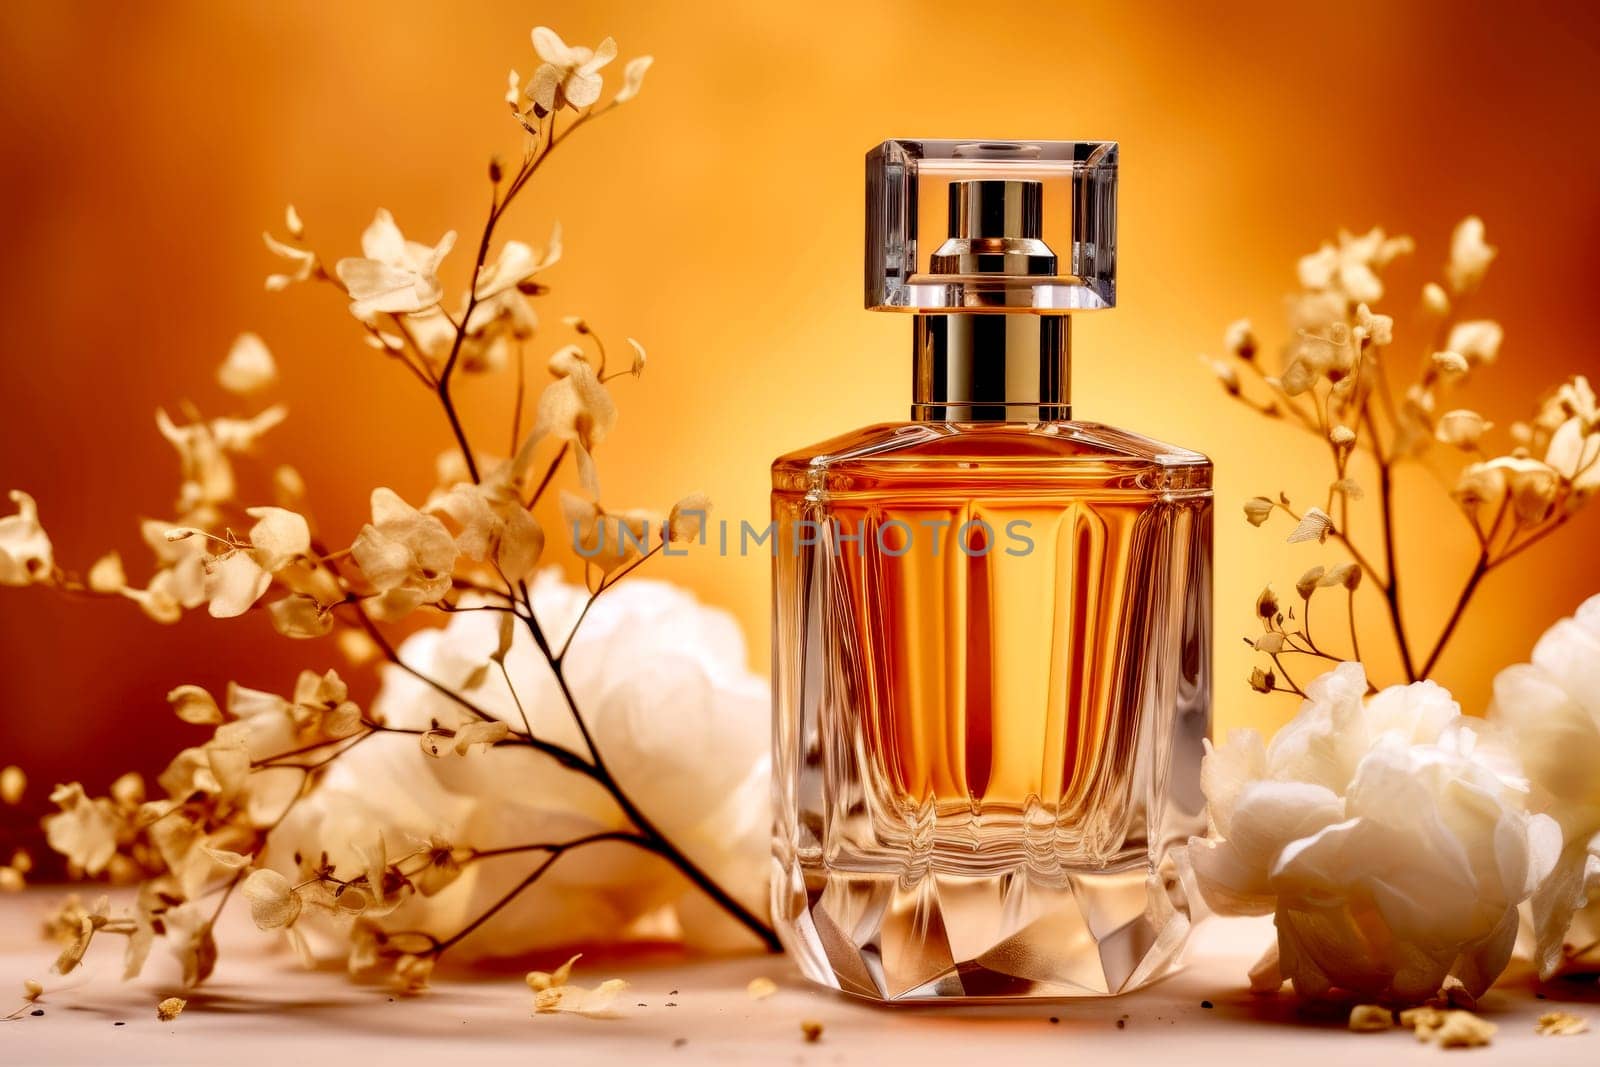 Golden toned perfume bottle surrounded by delicate white flowers